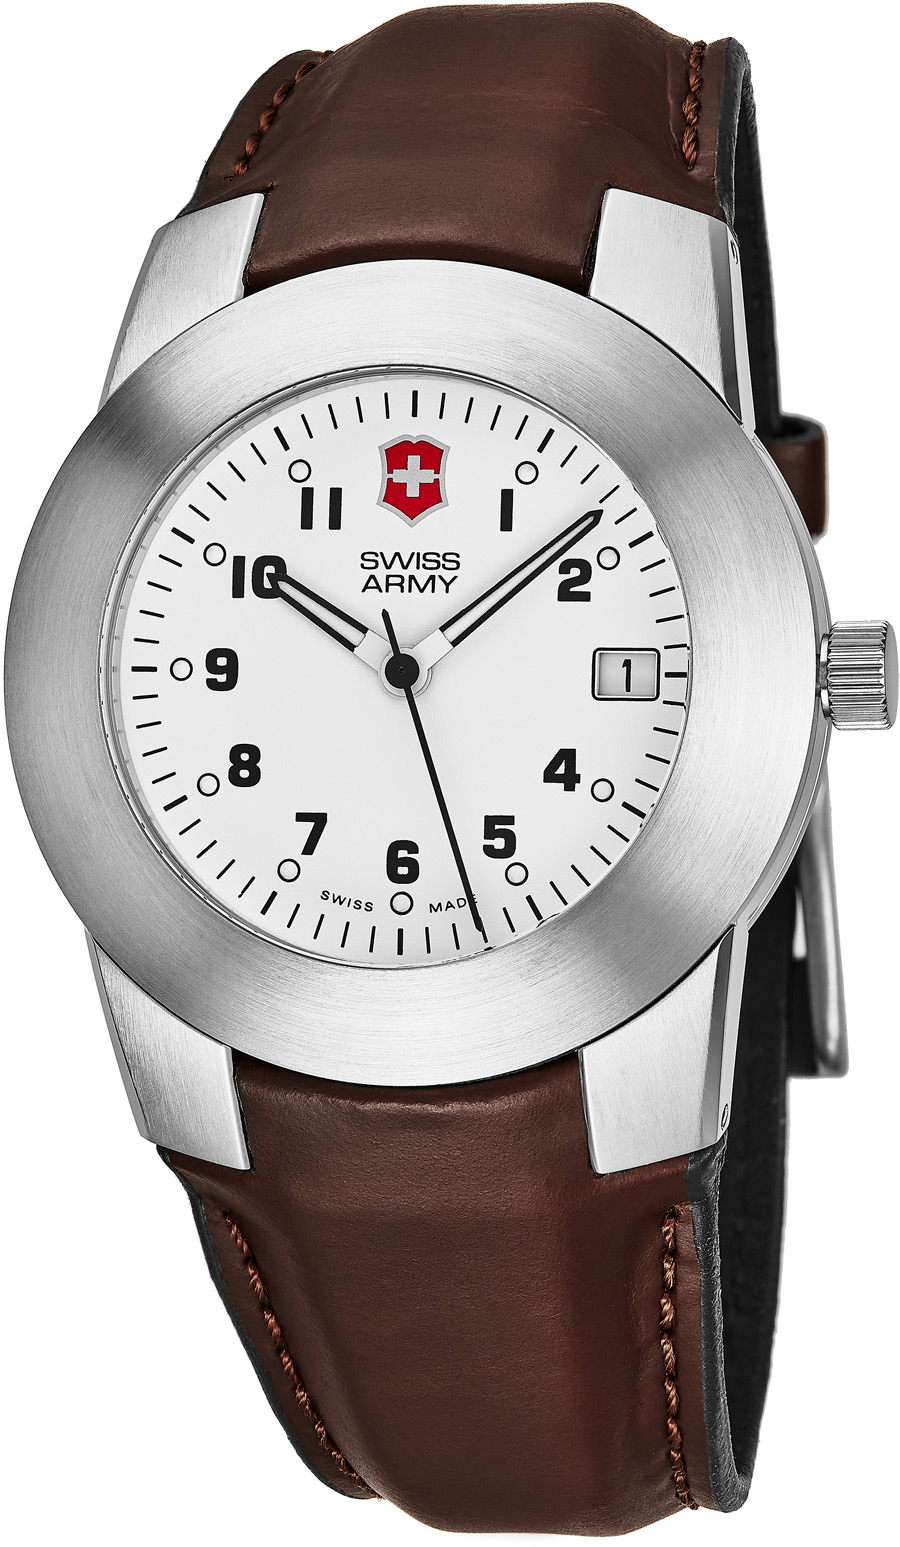 Discontinued Swiss Army Watches - Army Military